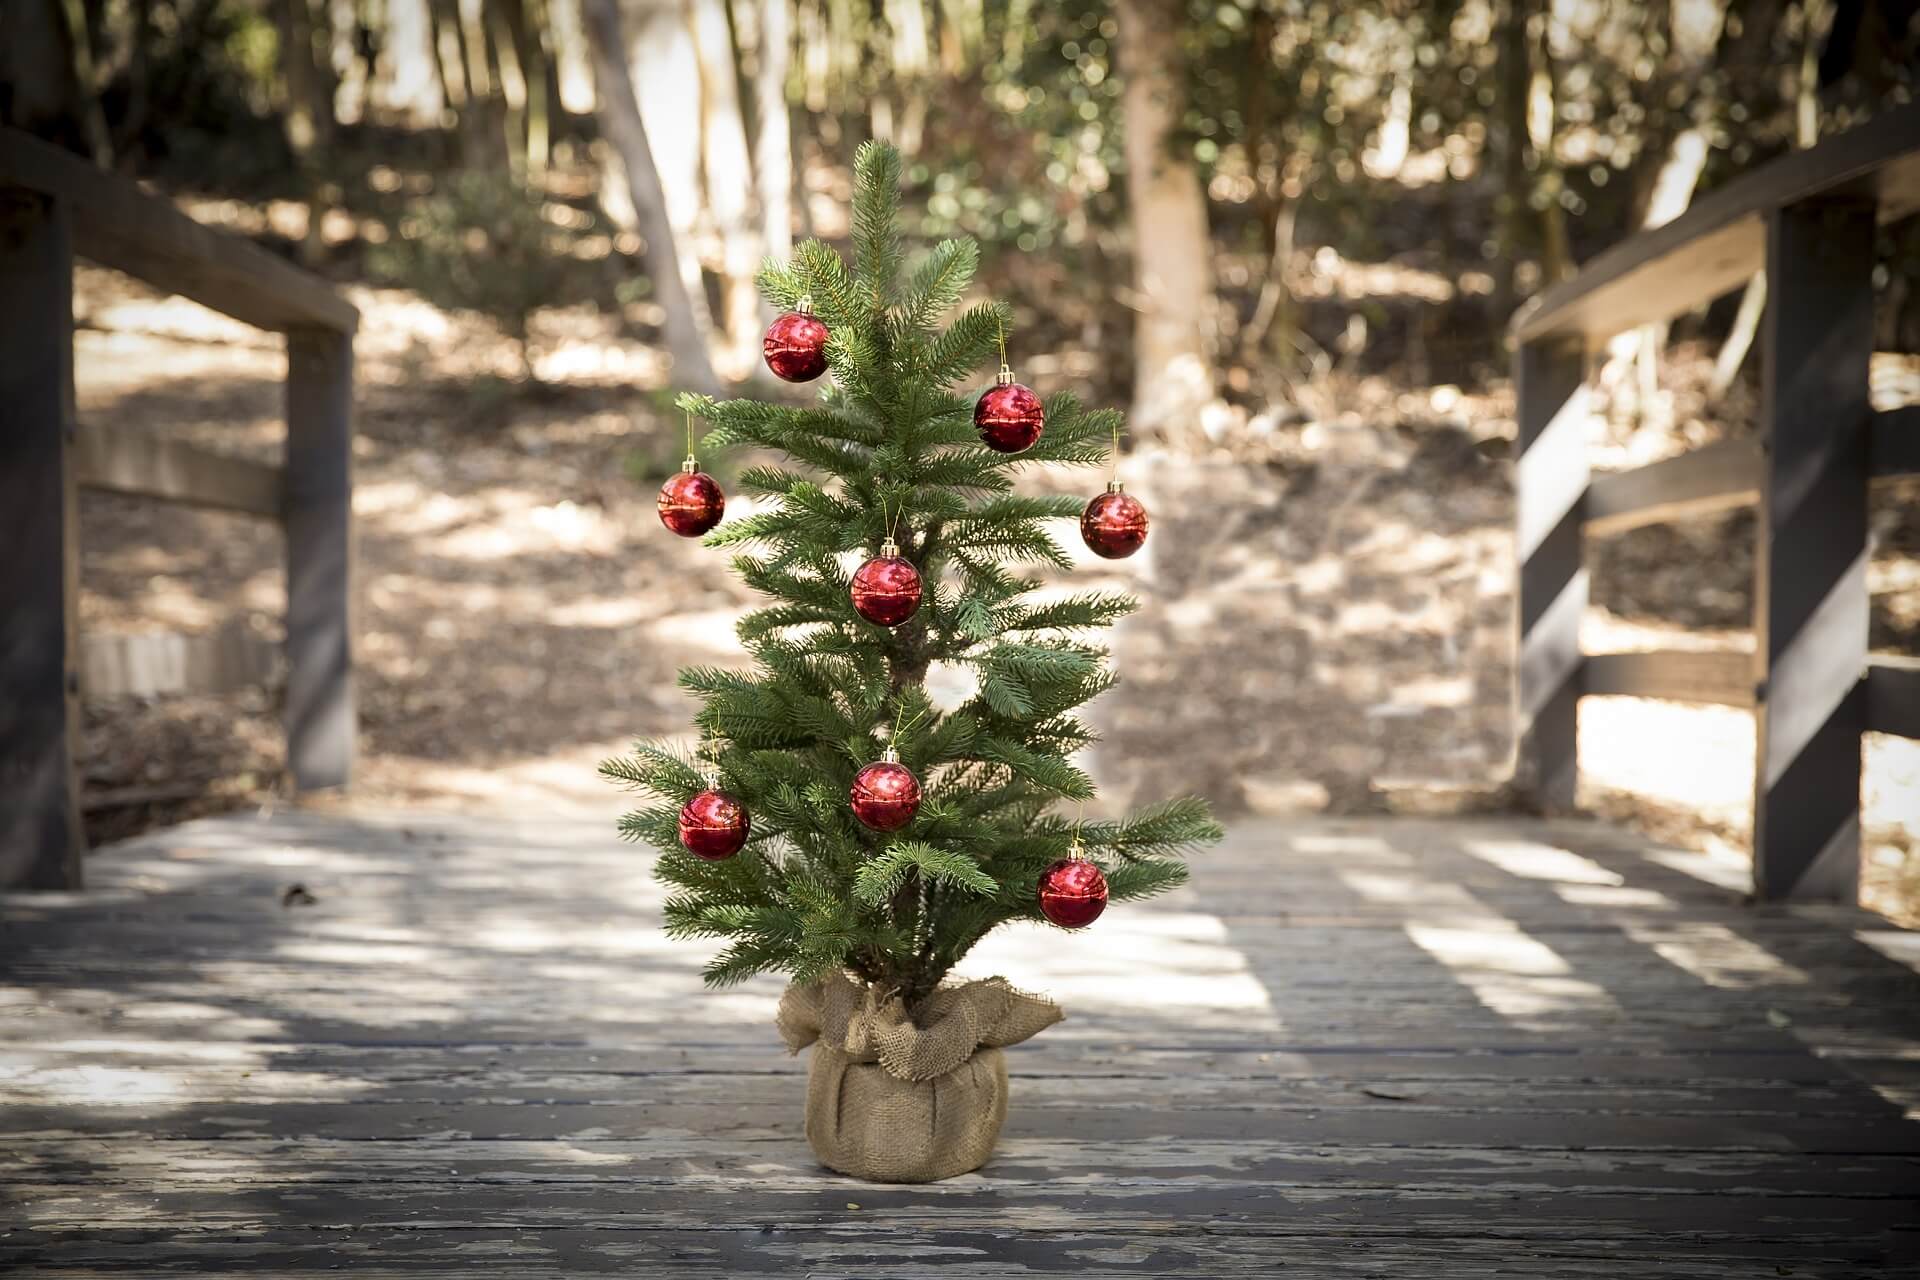 Evergreen Christmas Tree with Red Ornaments